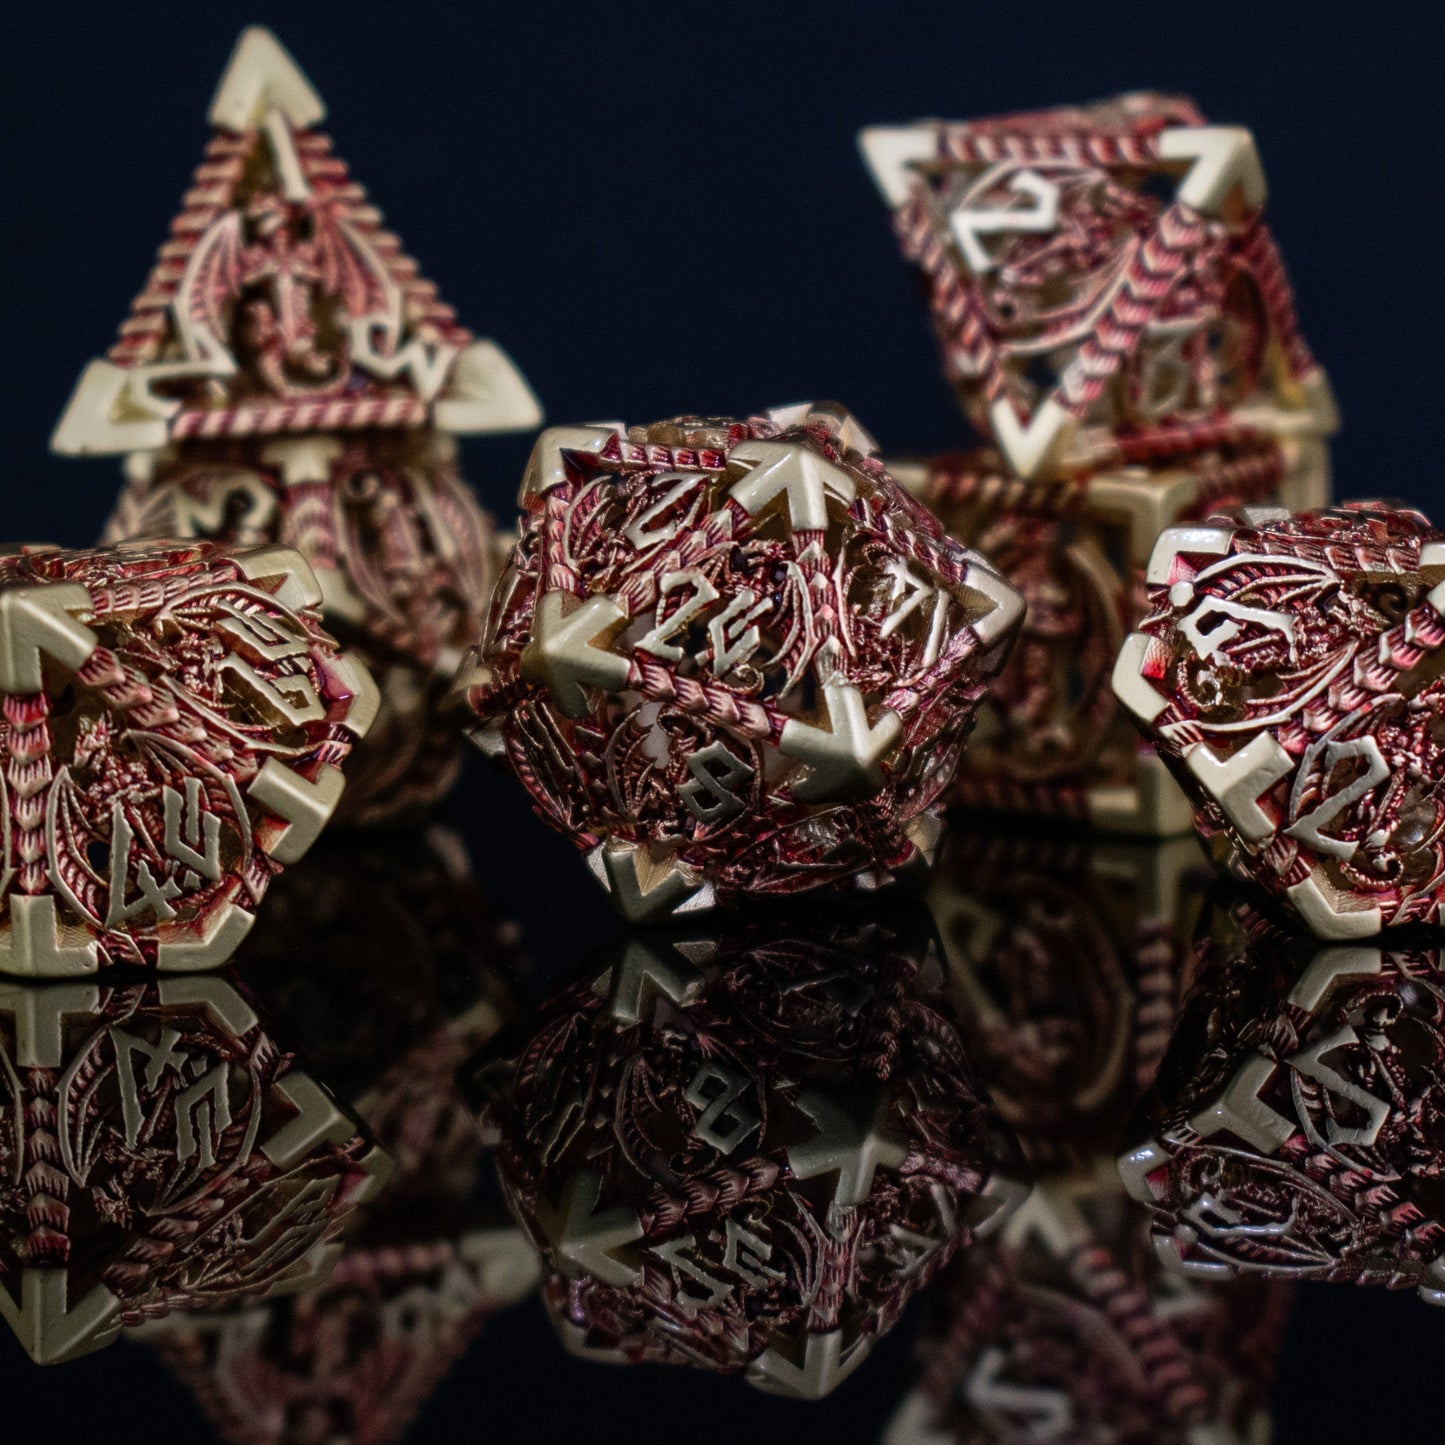 Dragon Sword Hollow Metal Dice Set - Red and Gold